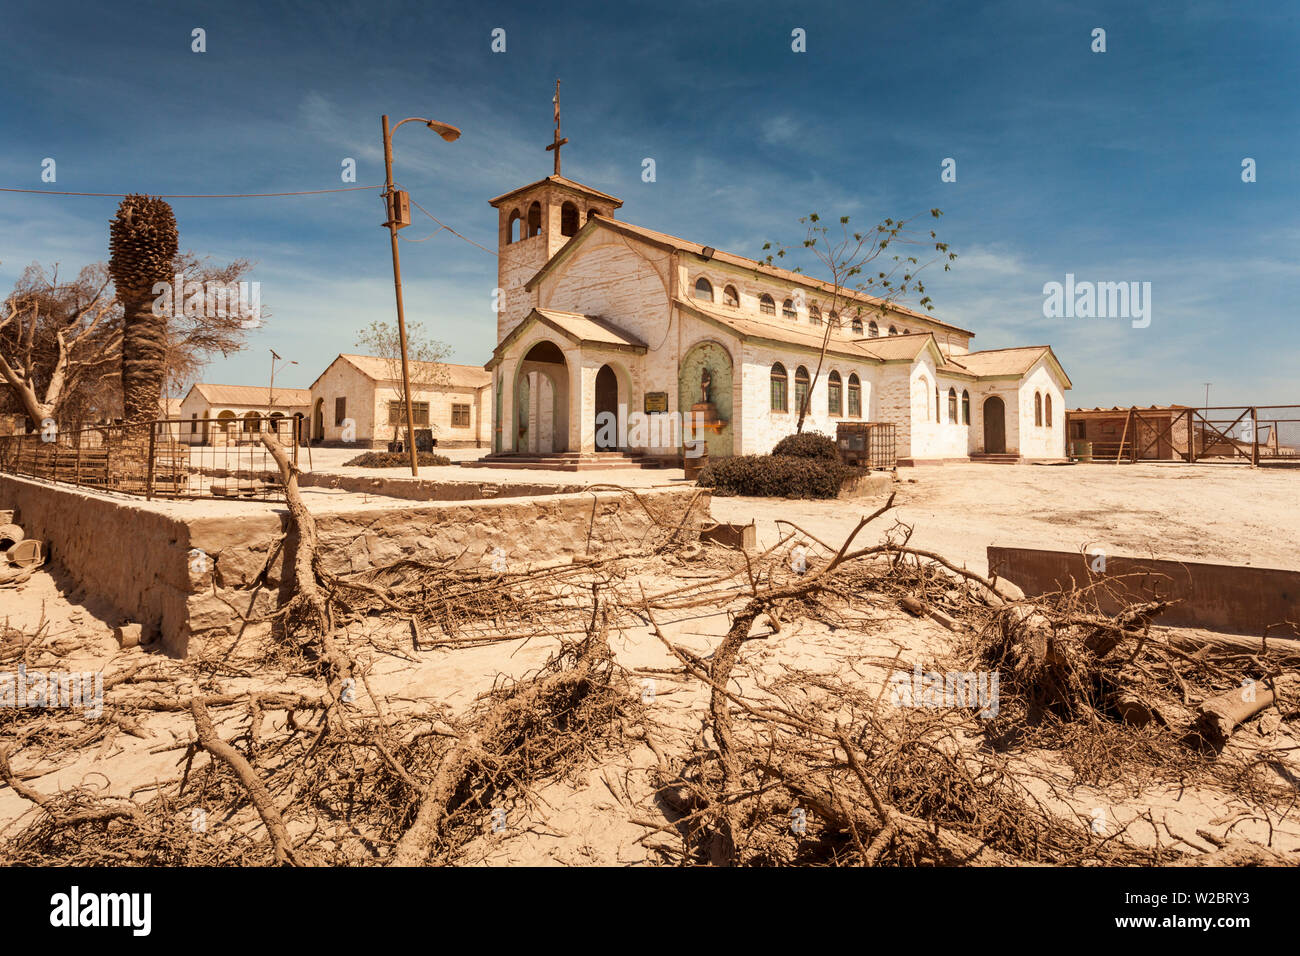 Chile, Officina Pedro de Valdivia, former saltpeter mining ghost town, town church Stock Photo